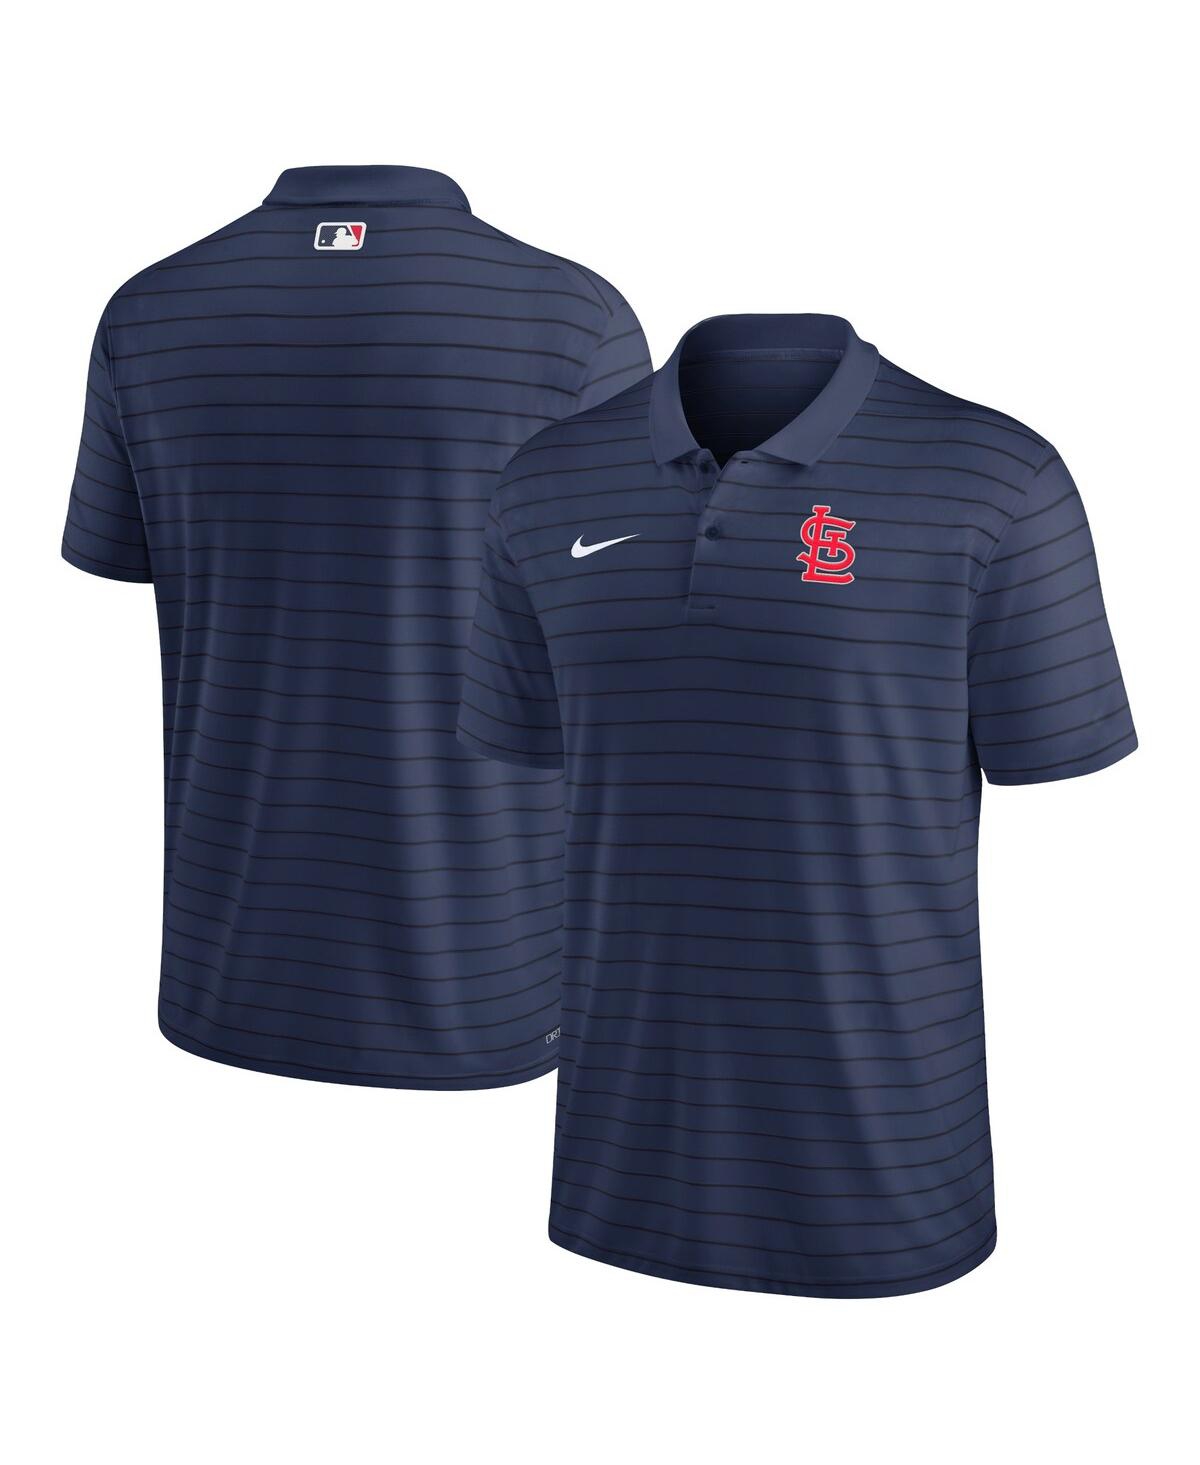 Men's Nike Navy St. Louis Cardinals Authentic Collection Victory Striped Performance Polo Shirt - Navy